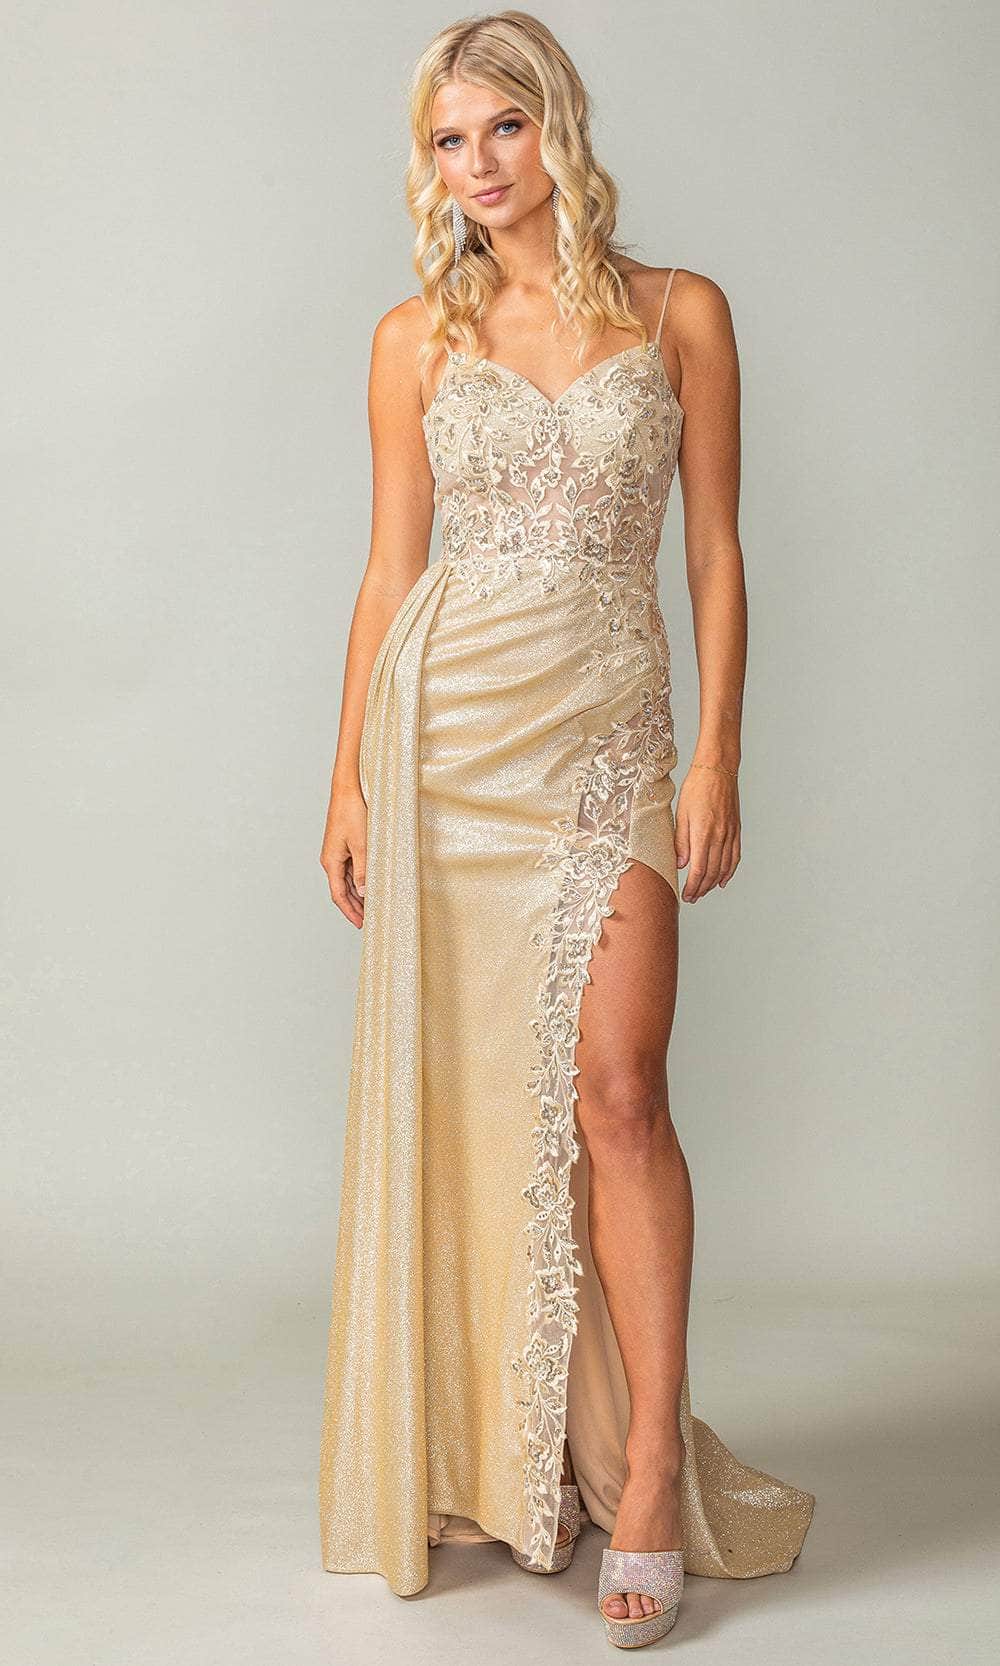 Image of Dancing Queen 4377 - Embroidery Detailed Prom Dress